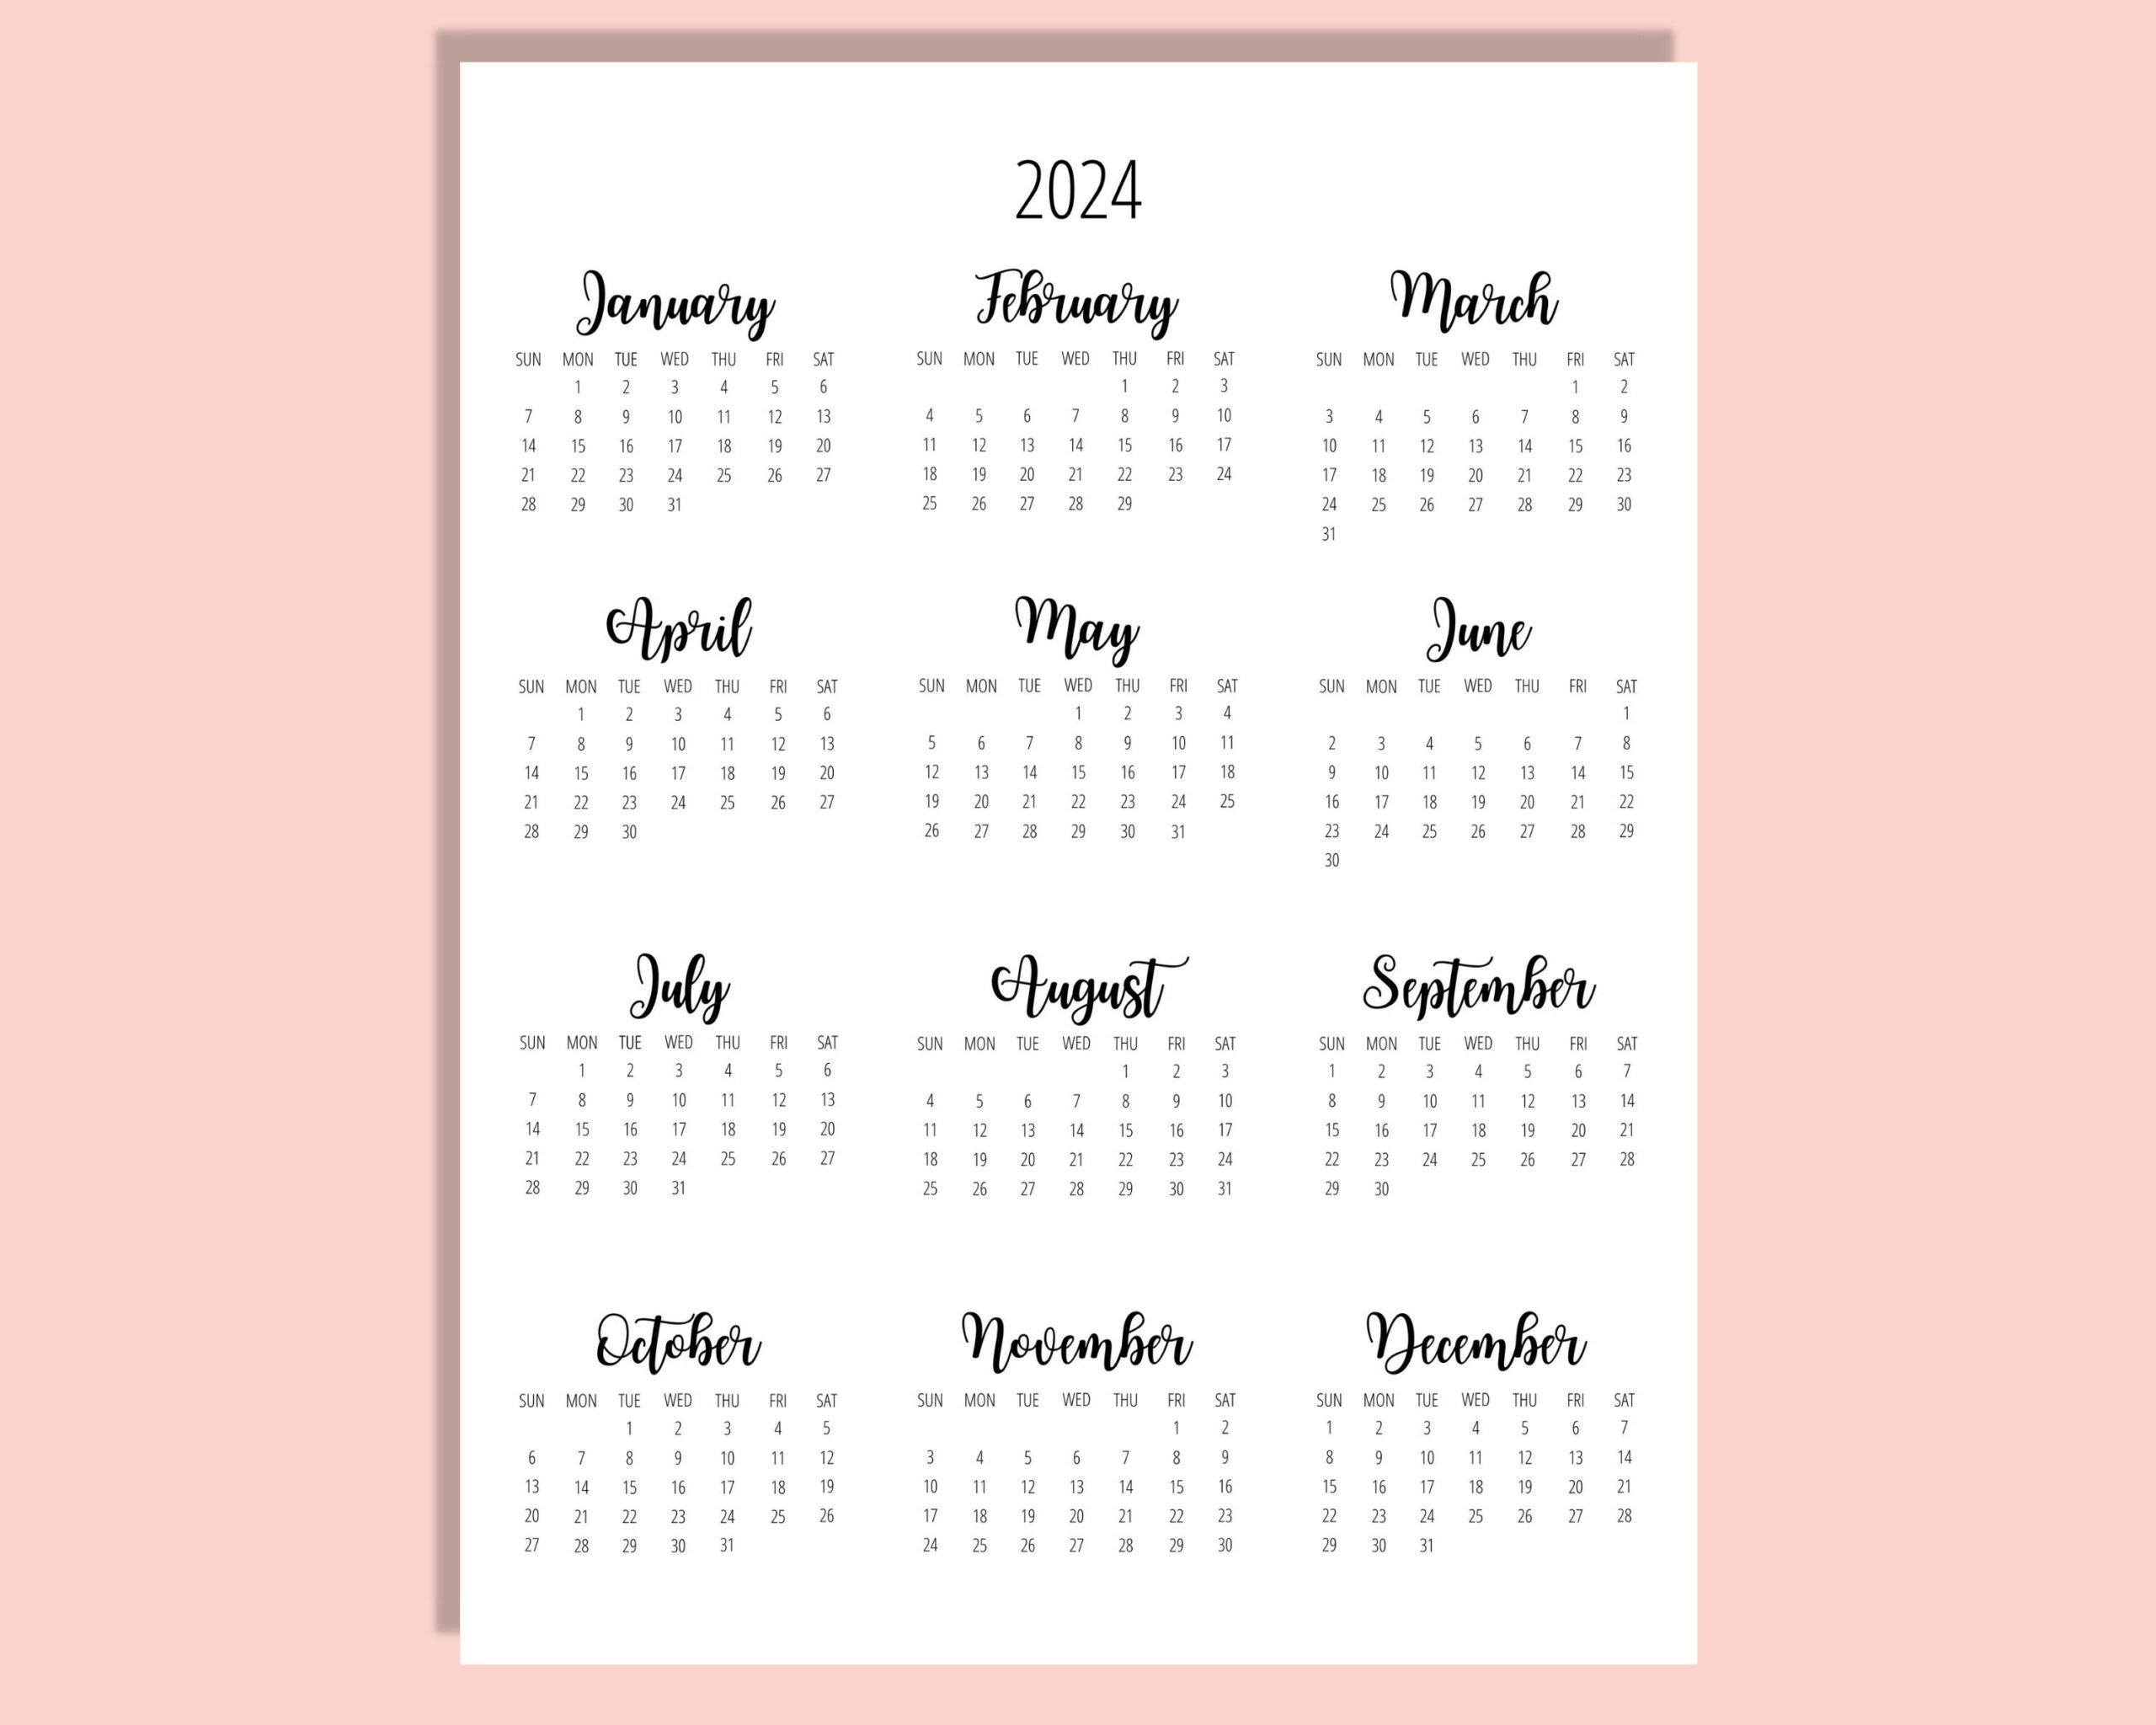 2024 Calendar Template 8.5 X 11 Inches Vertical Year At A - Etsy for 2024 Desk Calendar Printable